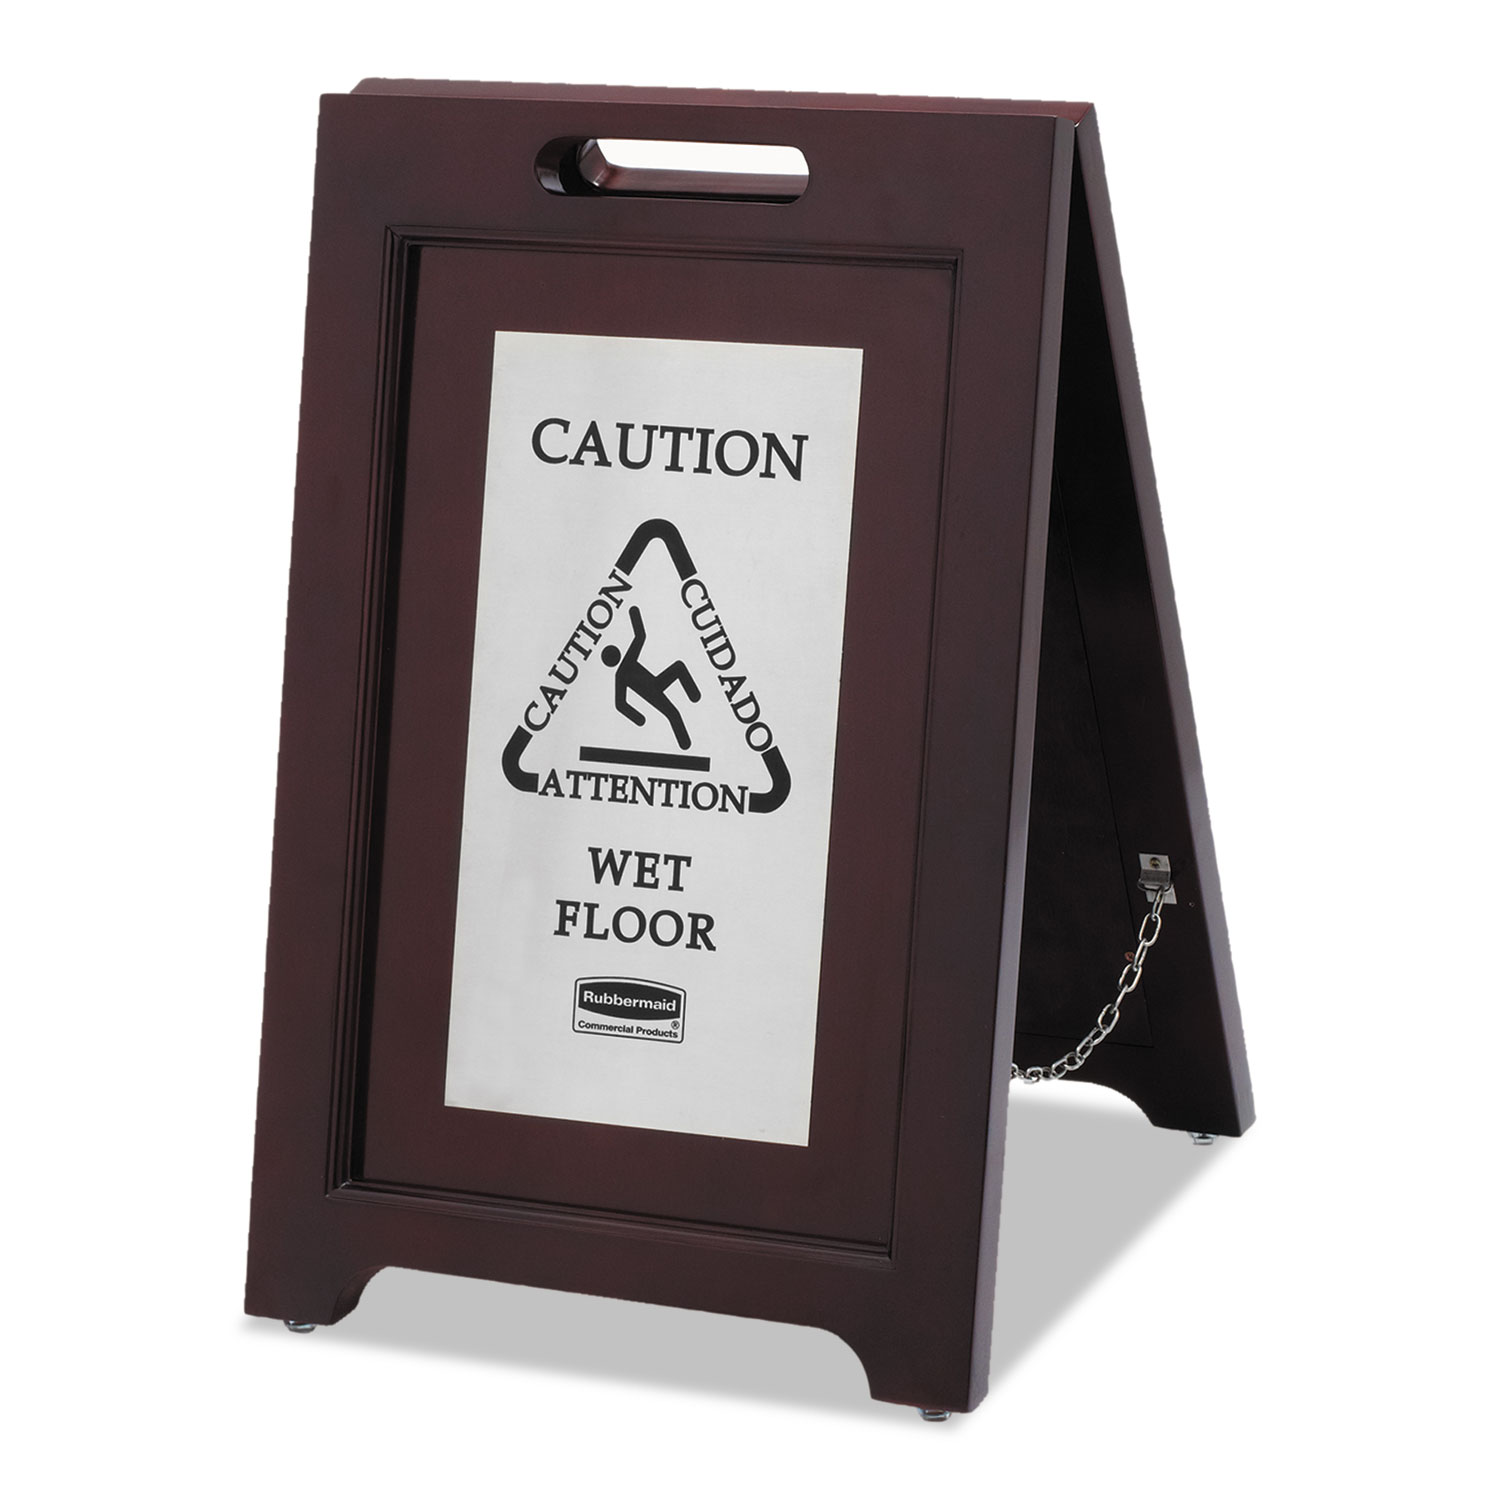  Rubbermaid Commercial 1867508 Executive 2-Sided Multi-Lingual Caution Sign, Brown/Stainless Steel,15 x 23 1/2 (RCP1867508) 